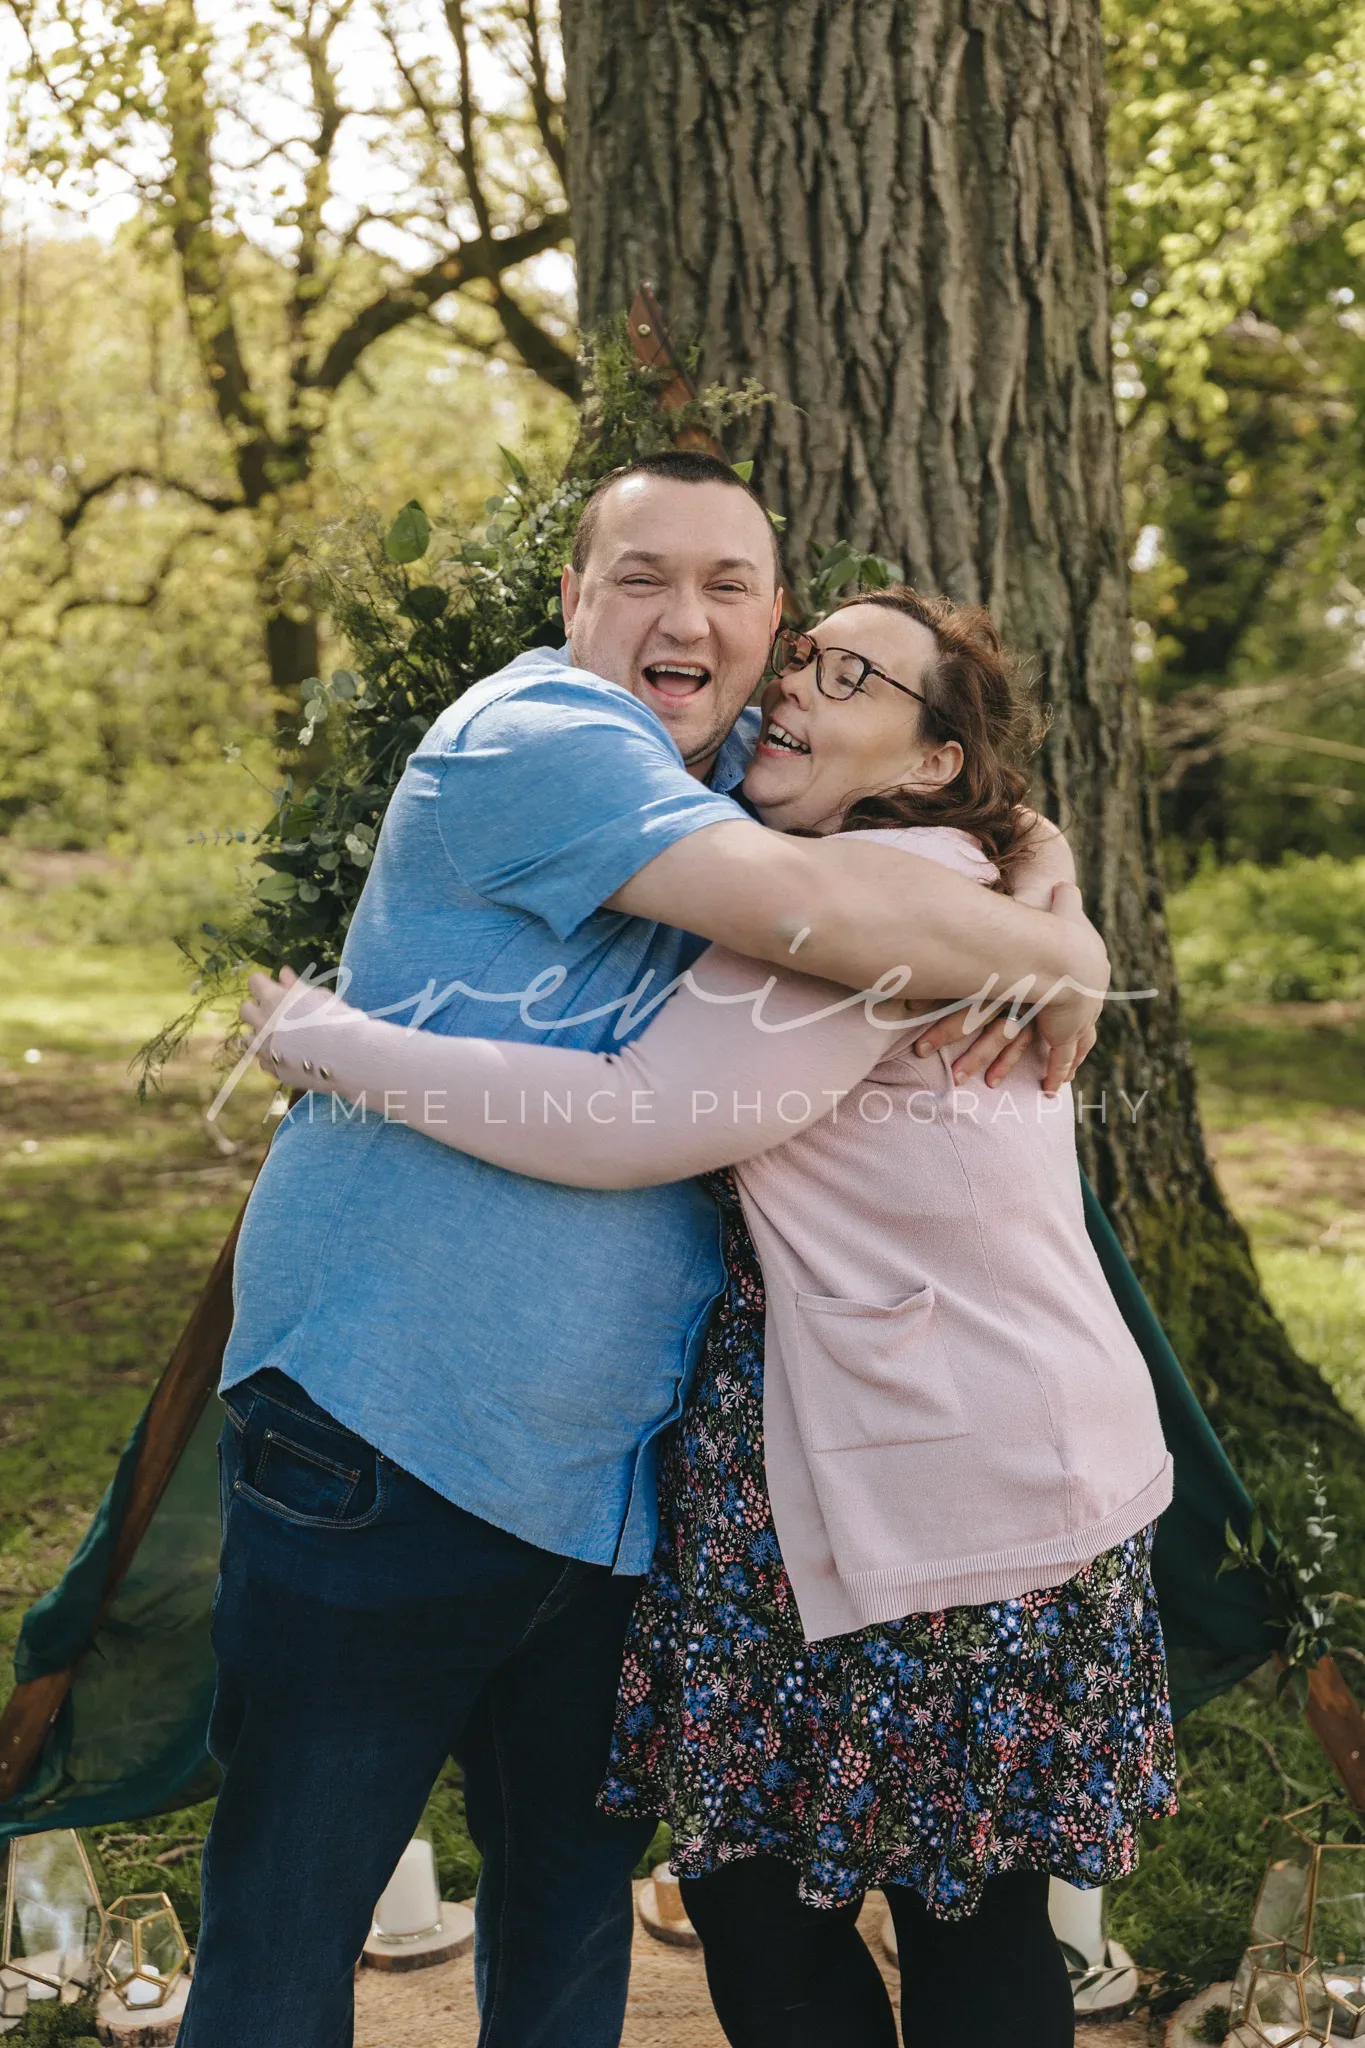 A joyful couple embraces under a tree in a lush park. Ashley, wearing a blue shirt and jeans, and Samantha, sporting a floral dress and glasses, are smiling broadly, radiating happiness.